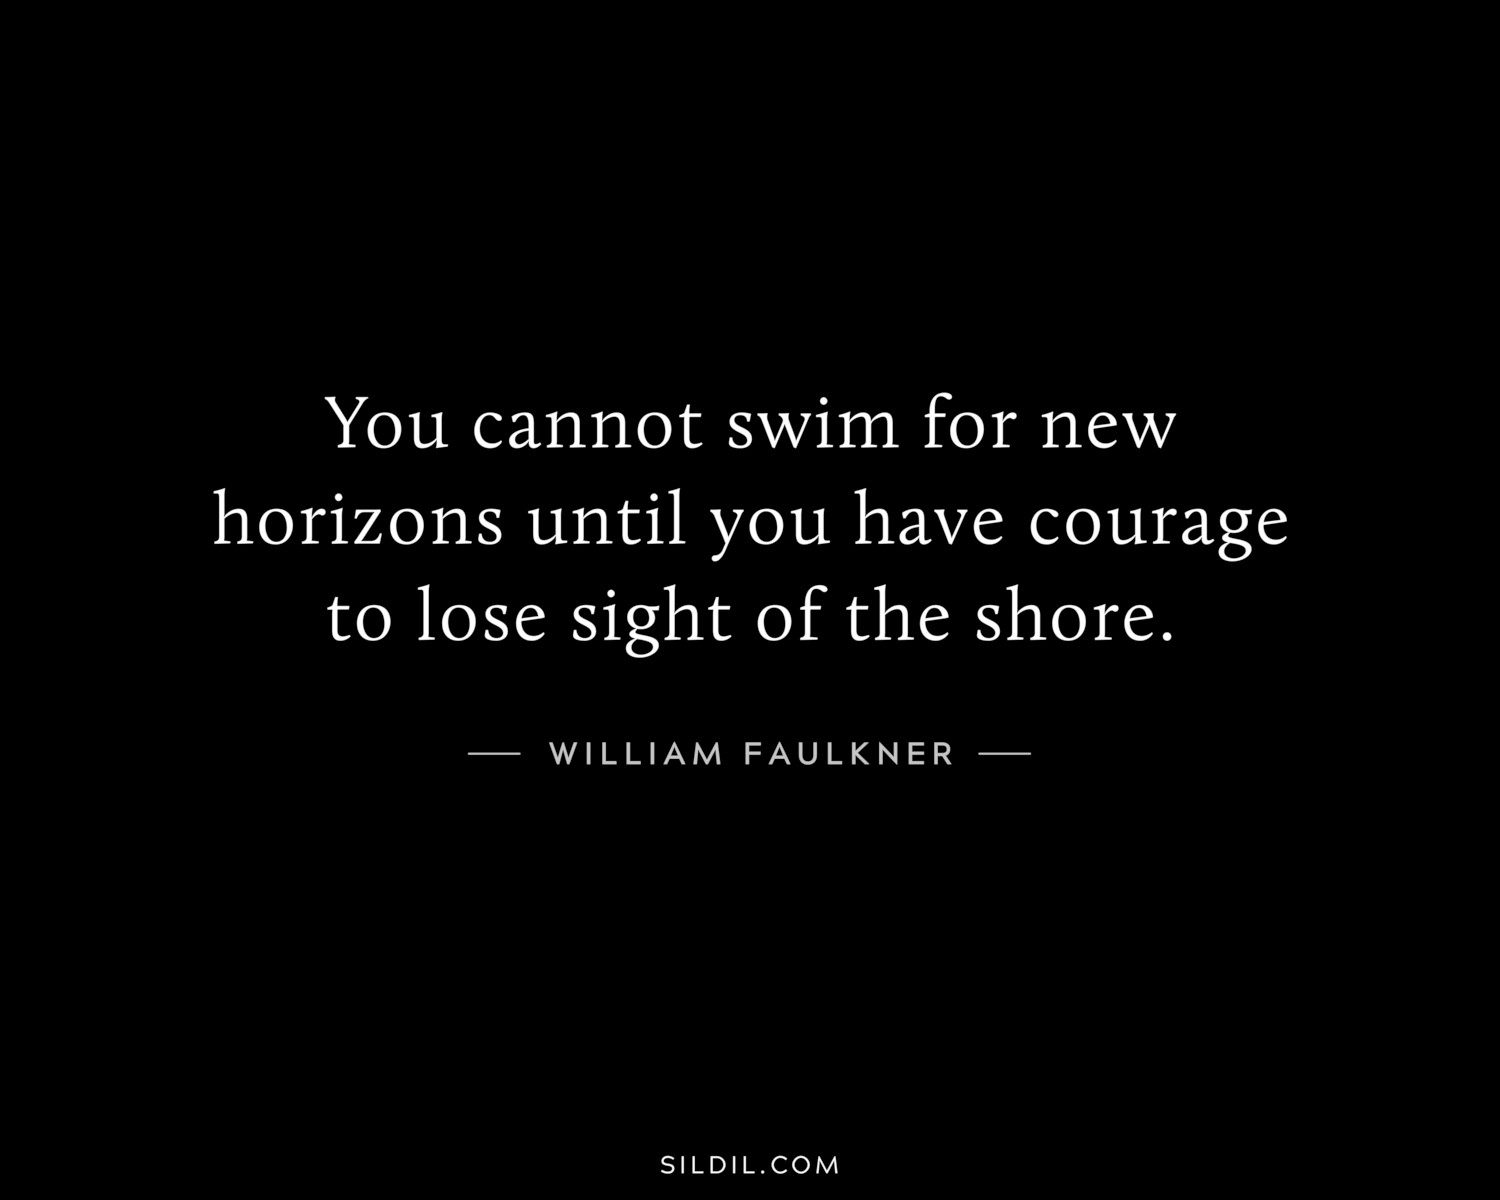 You cannot swim for new horizons until you have courage to lose sight of the shore.